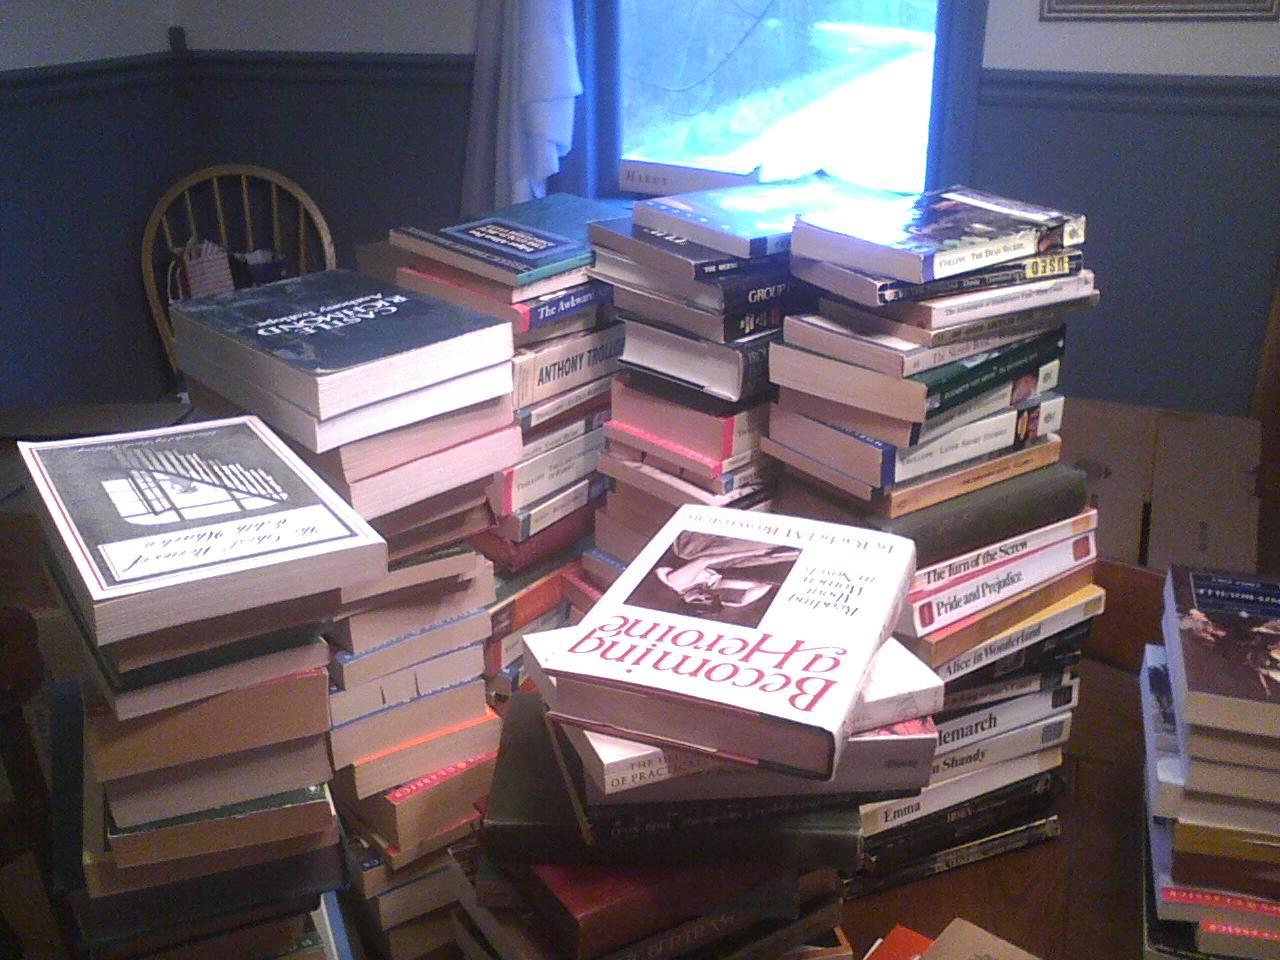 Large stack of books